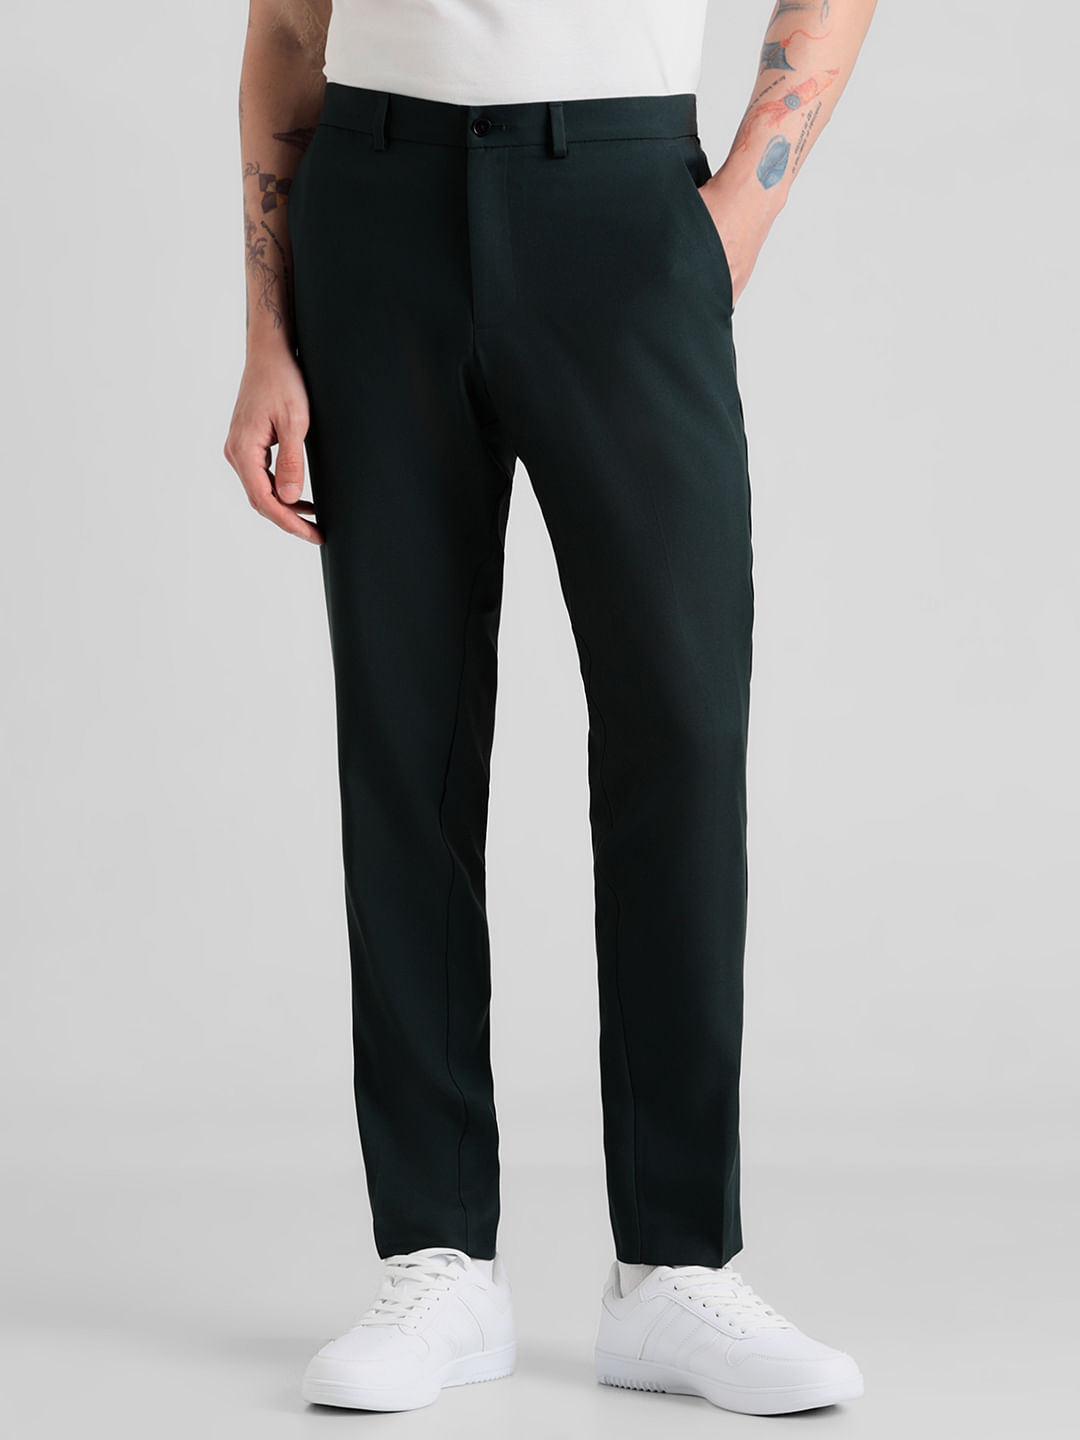 Scala Street Black Riding Pant | Buy online in India